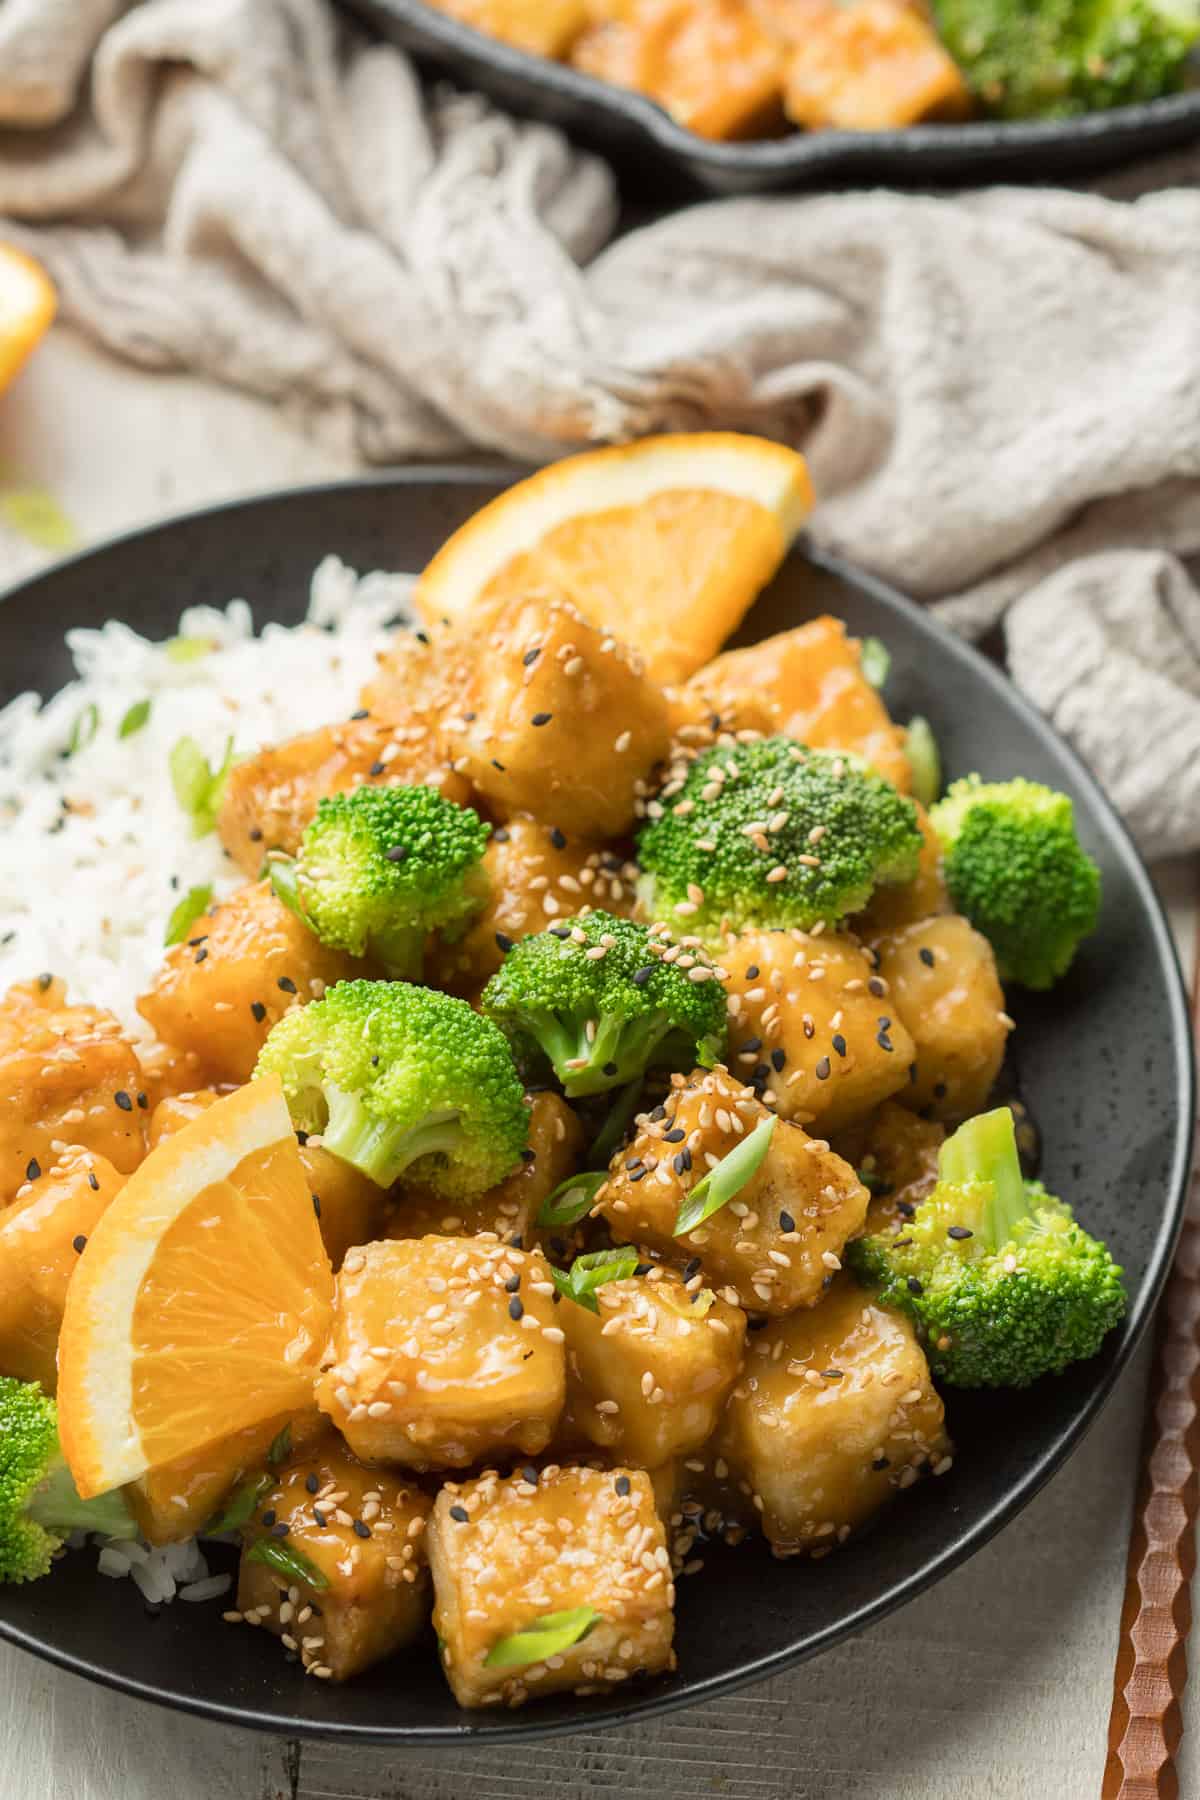 Plate of Crispy Orange Tofu, Broccoli, and Rice with Cloth and Skillet in the Background